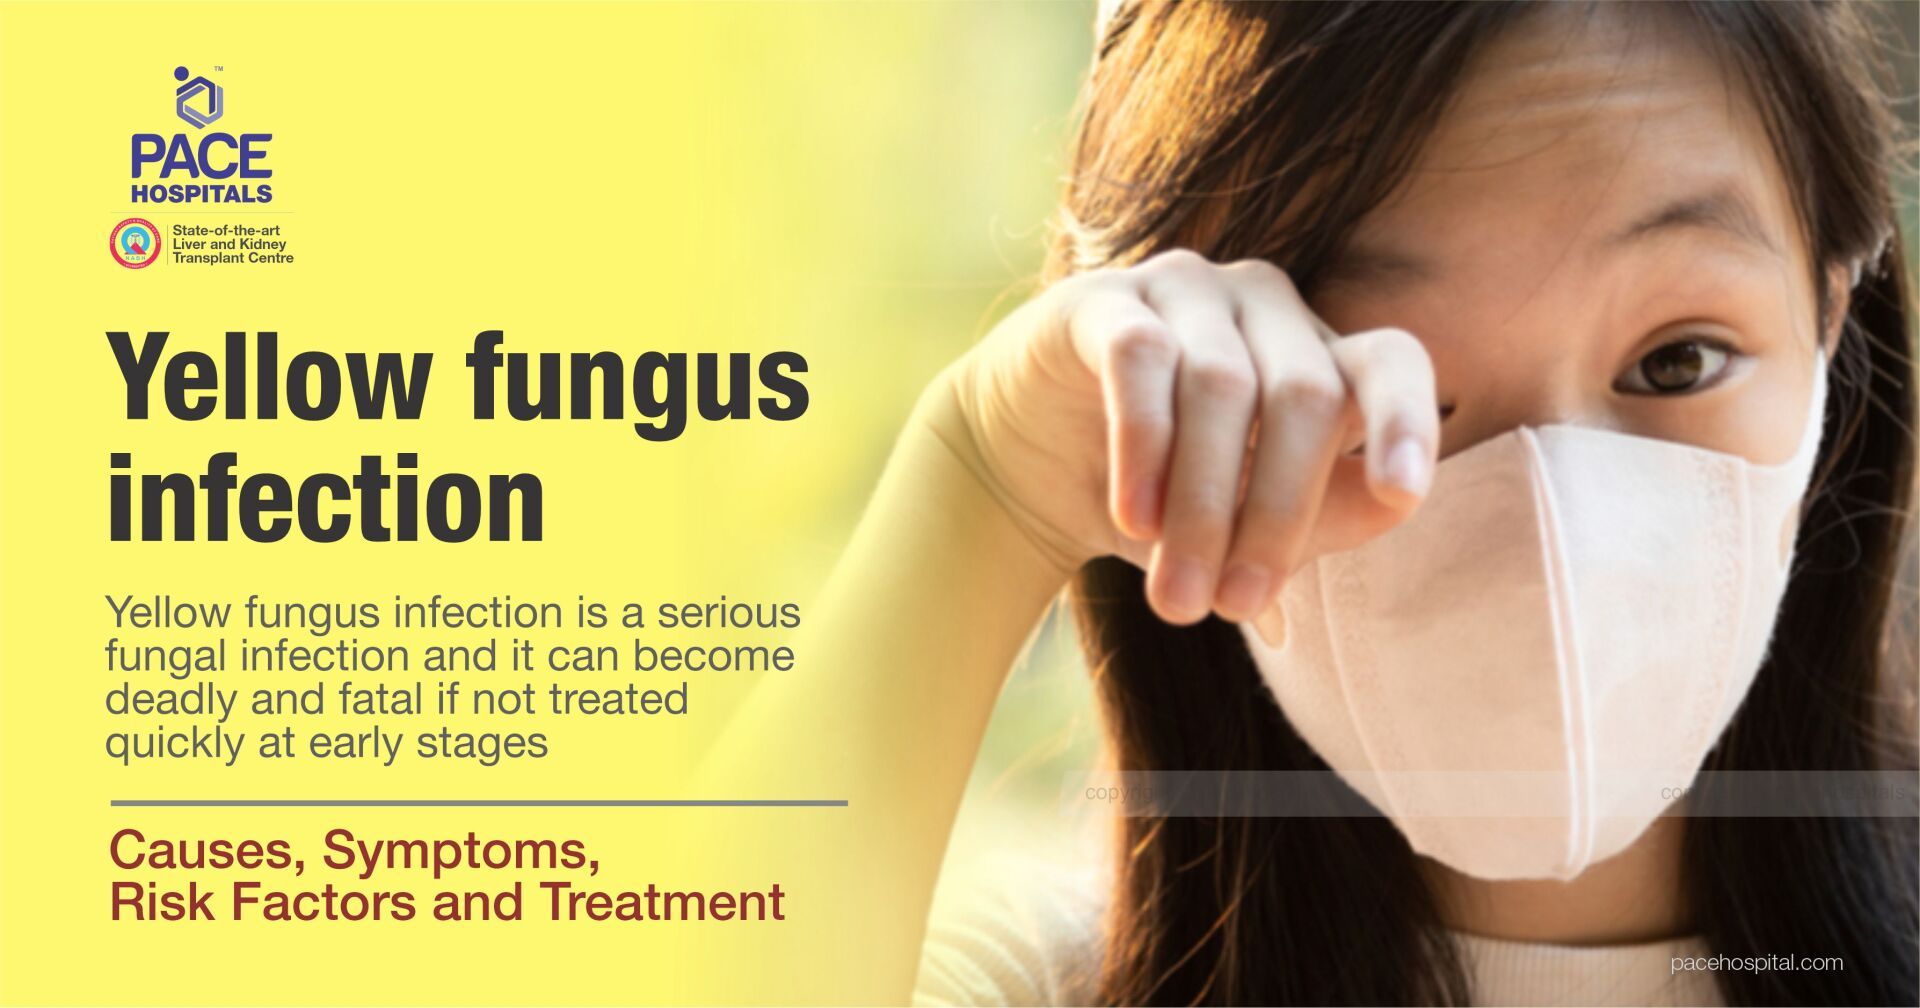 Yellow Fungus Infection: Symptoms, Risks, Causes, Diagnosis, Treatment - in COVID patients